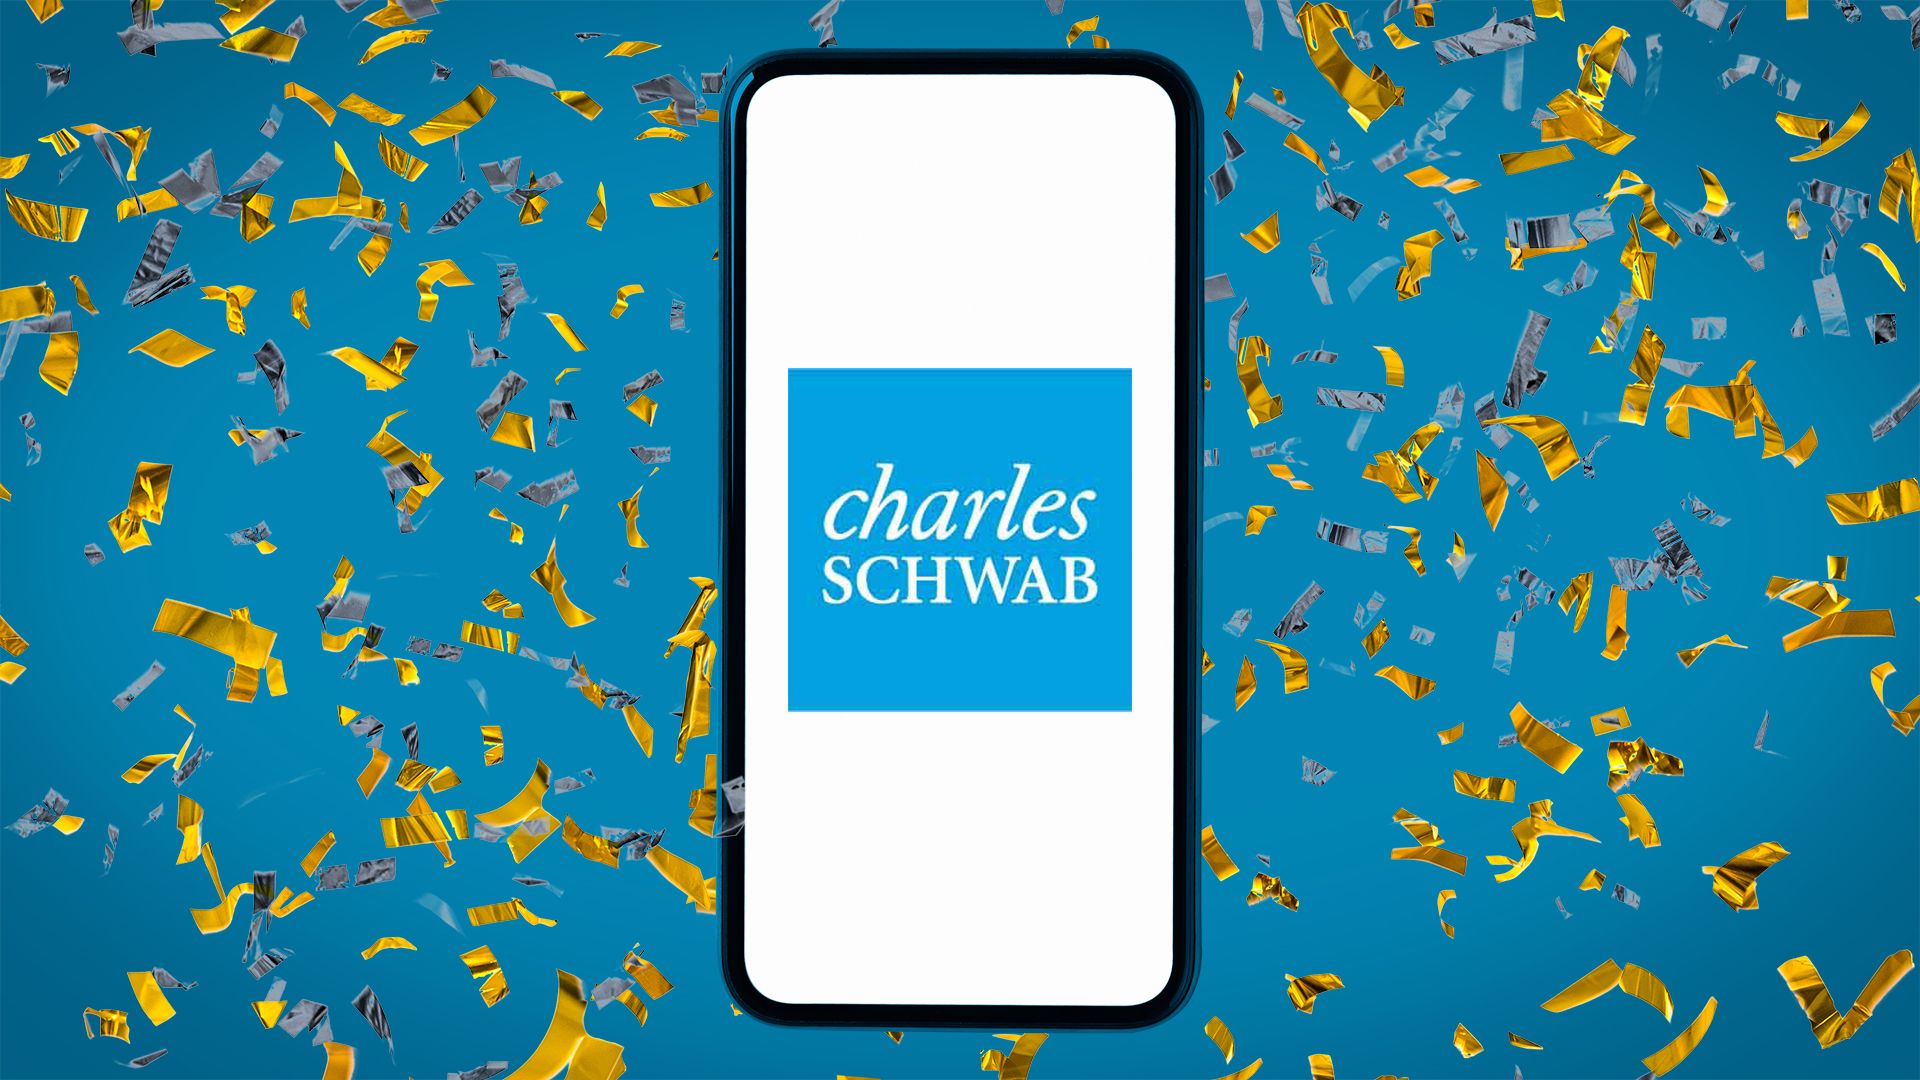 Newest Charles Schwab Promotions, Bonuses, Offers and ...